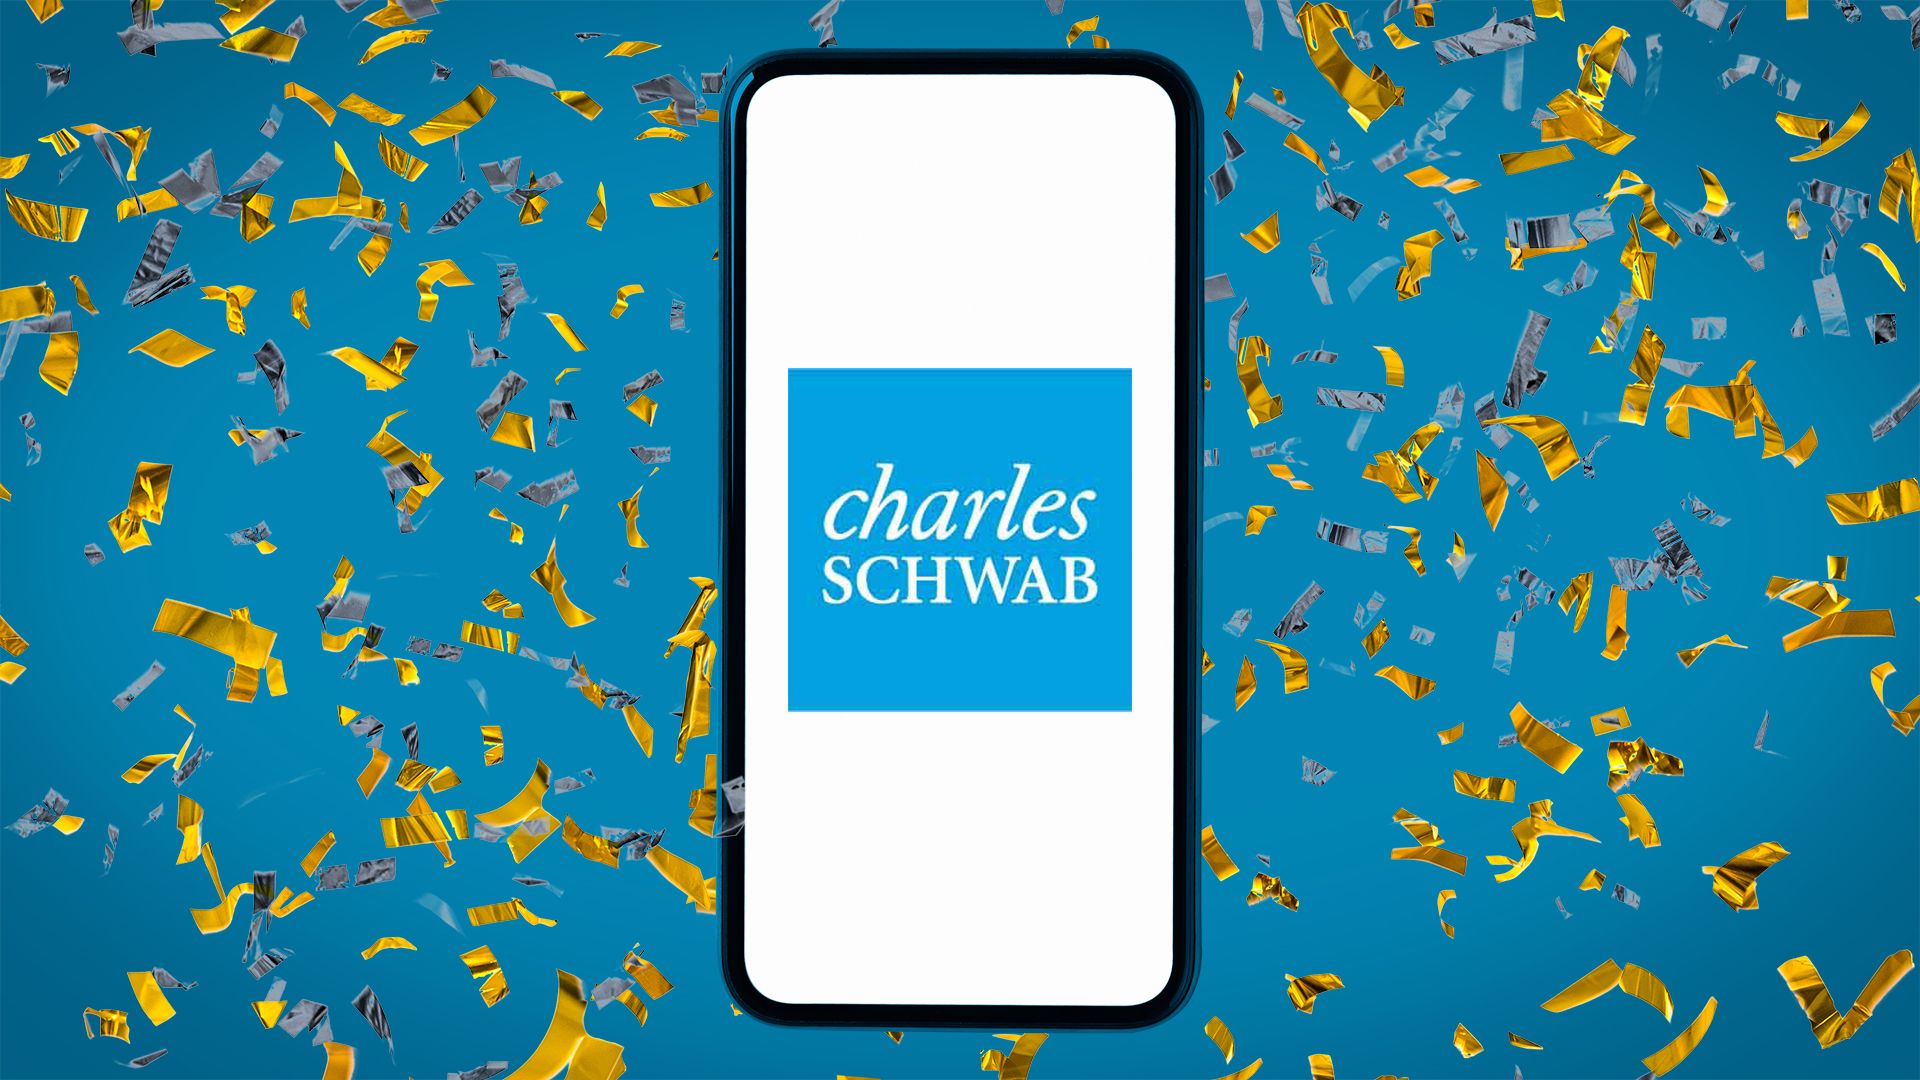 Newest Charles Schwab Promotions, Bonuses, Offers and ...